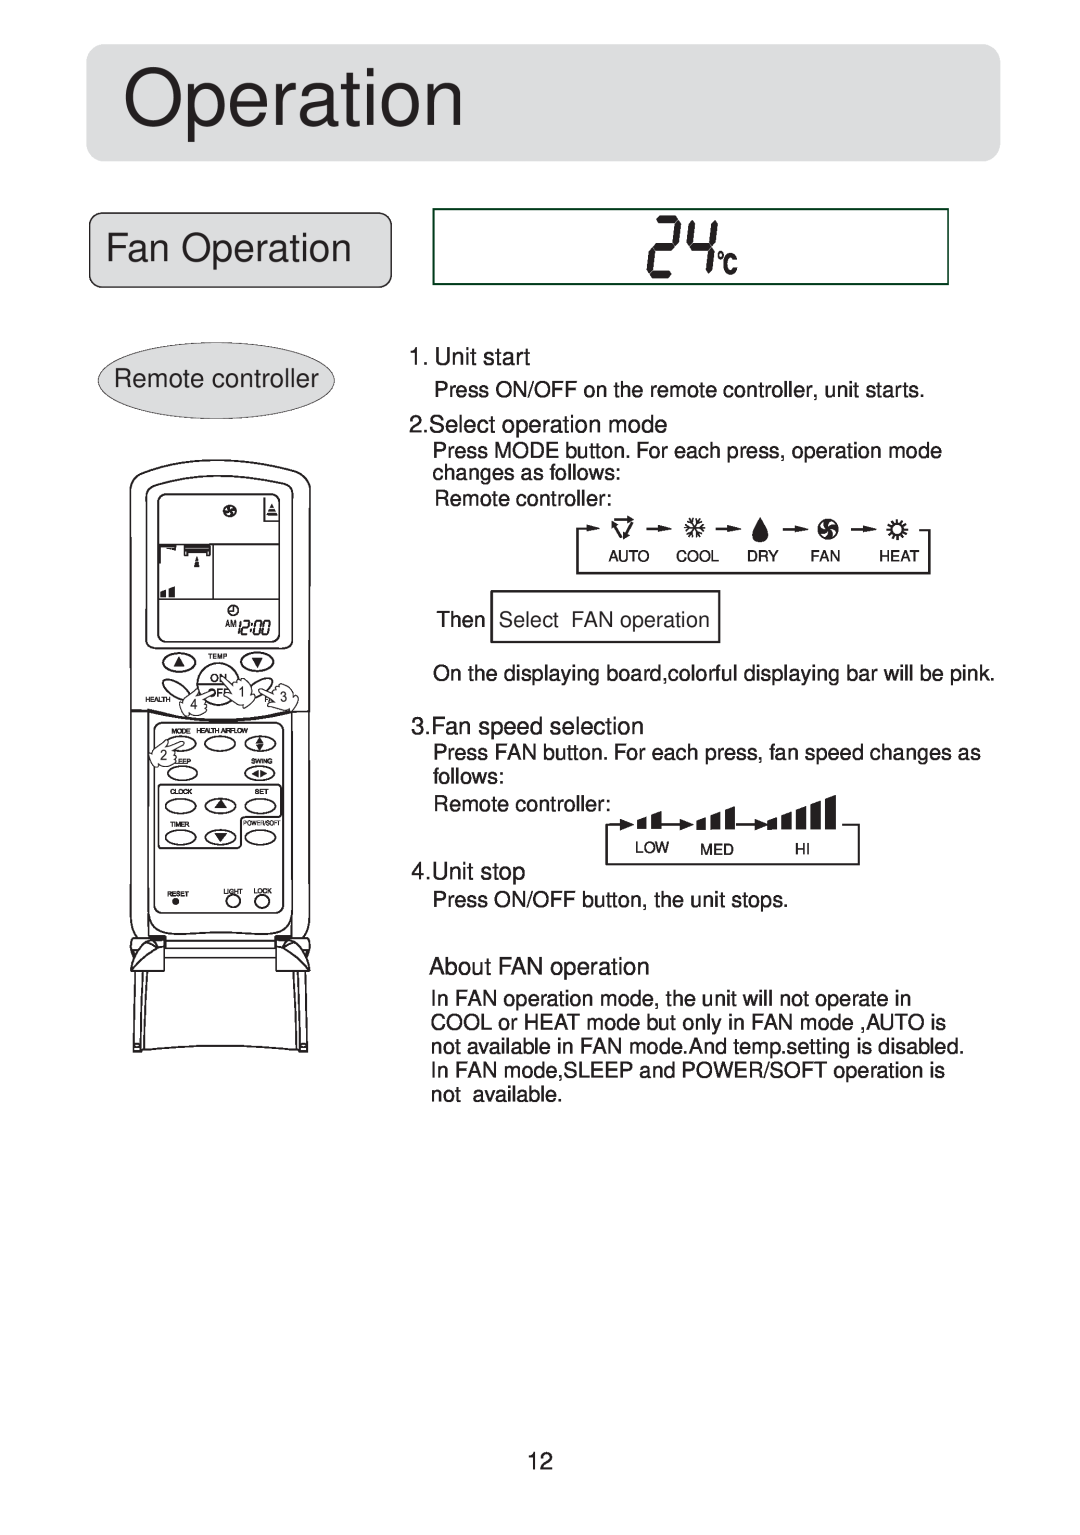 Haier HSU-09HV04, HSU-12HV04, HSU-18HV04, HSU-22HV04 Fan Operation, Remote controller, Unit start, Select operation mode 